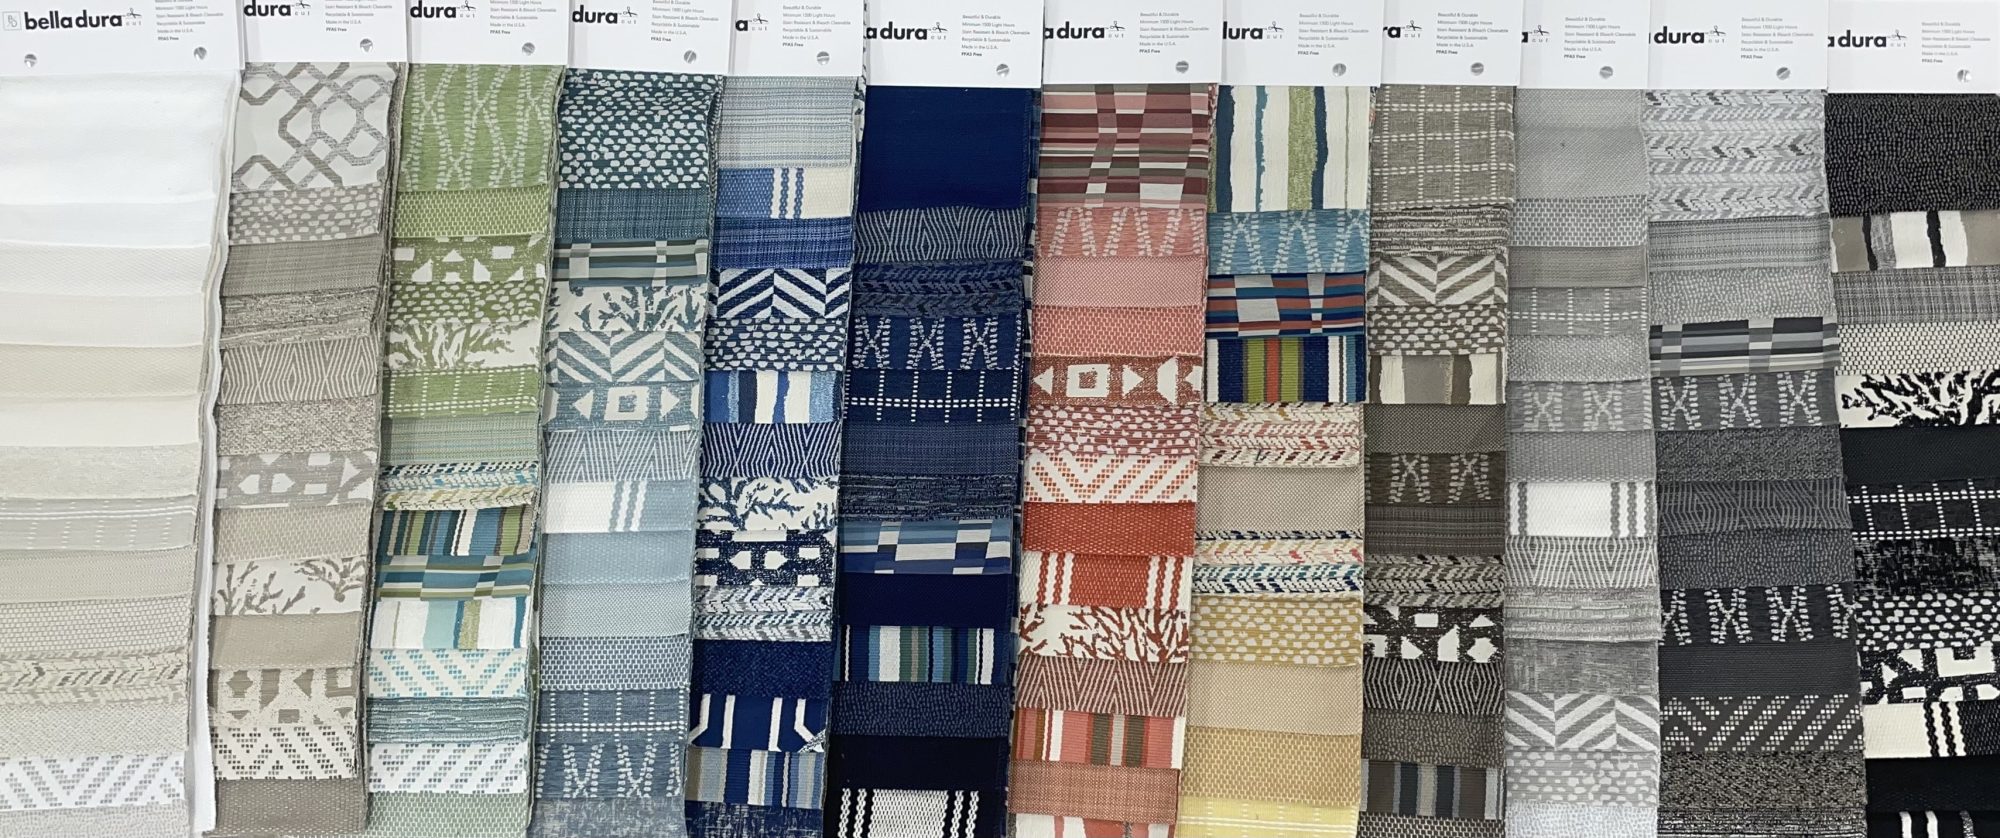 Samples of many of the Bella Dura fabric colors and designed, organized by color.